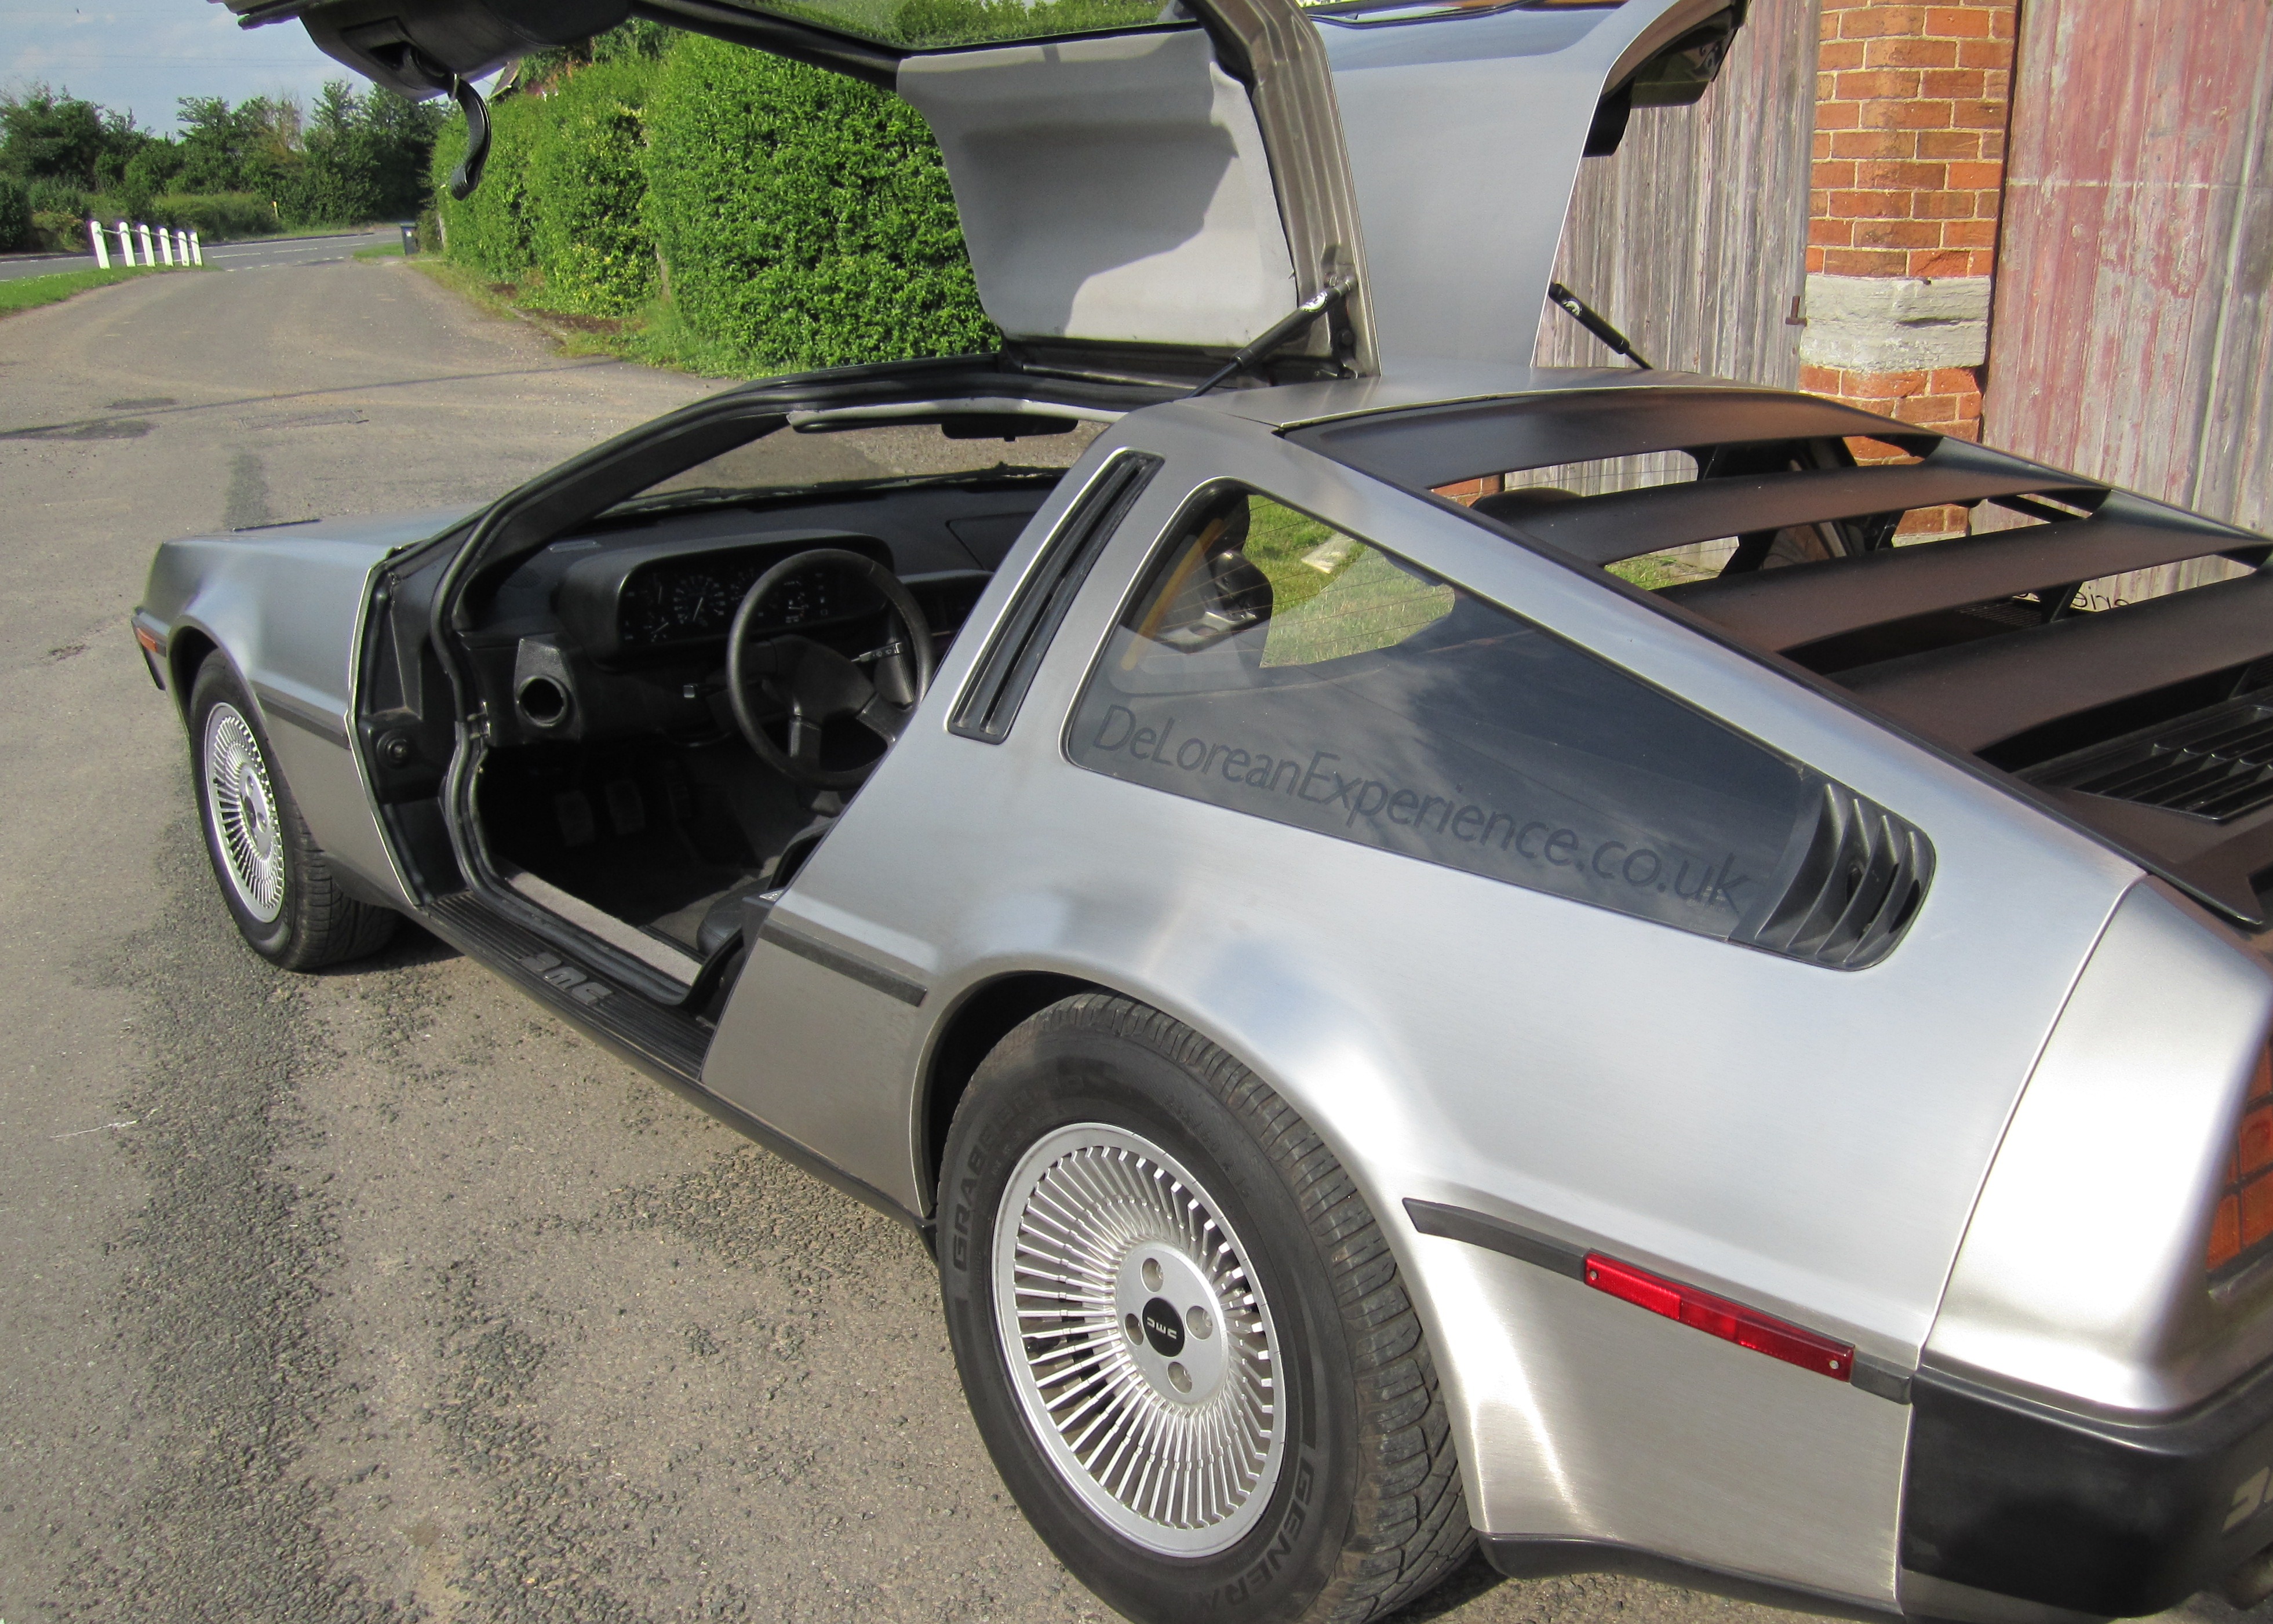 Delorean DMC-12 will always put a smile on everyones face